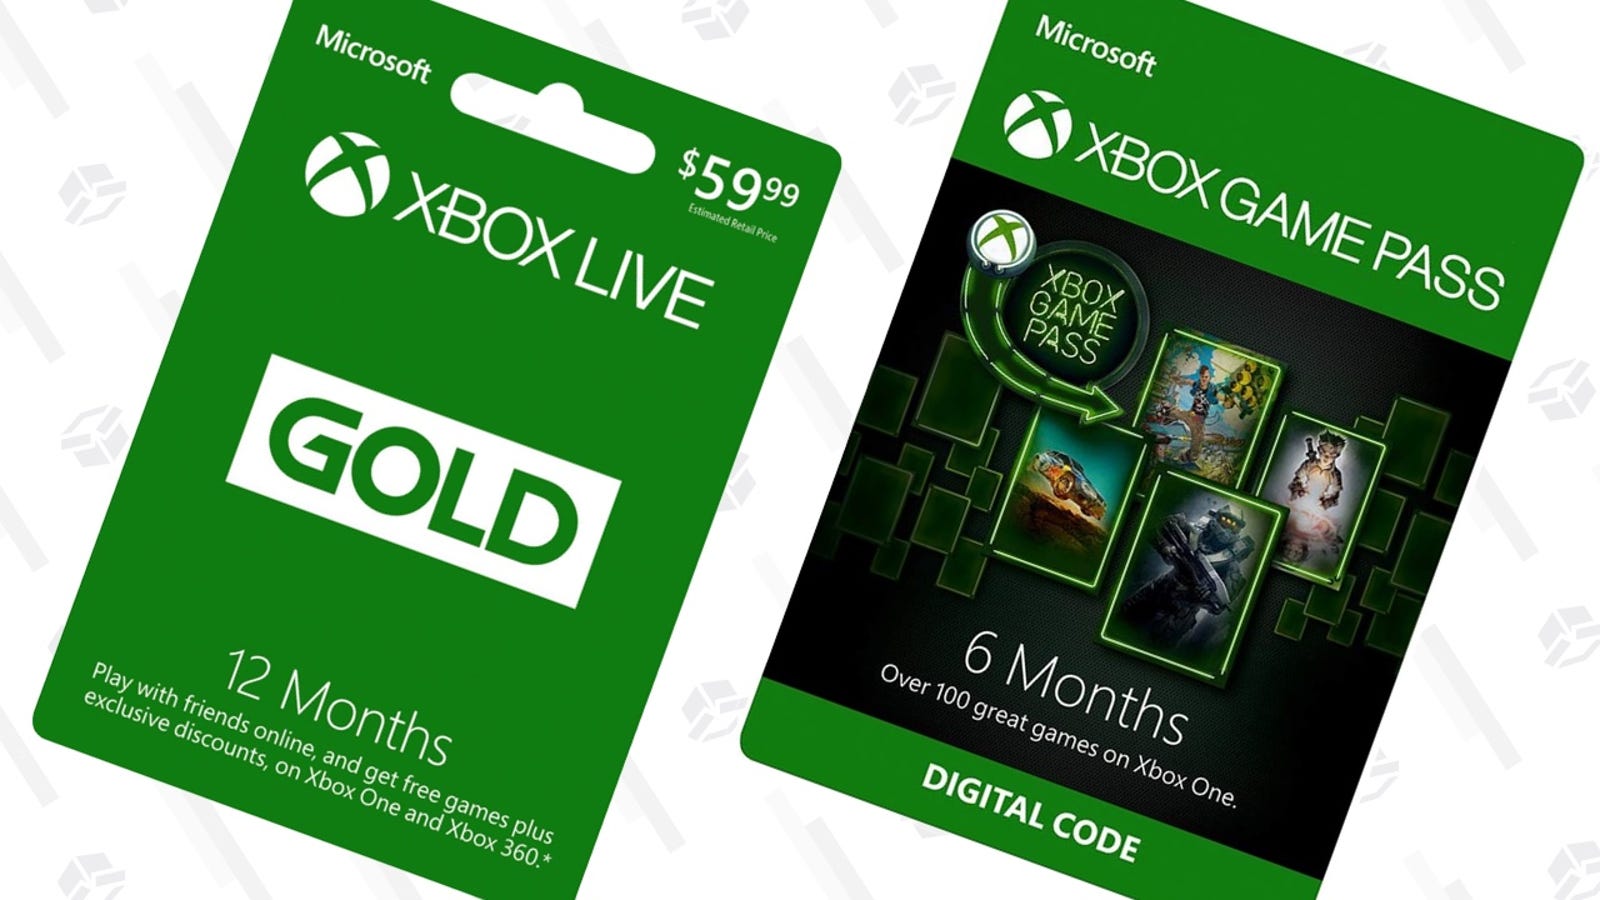 xbox live 12 month gold ultimate gaming pass